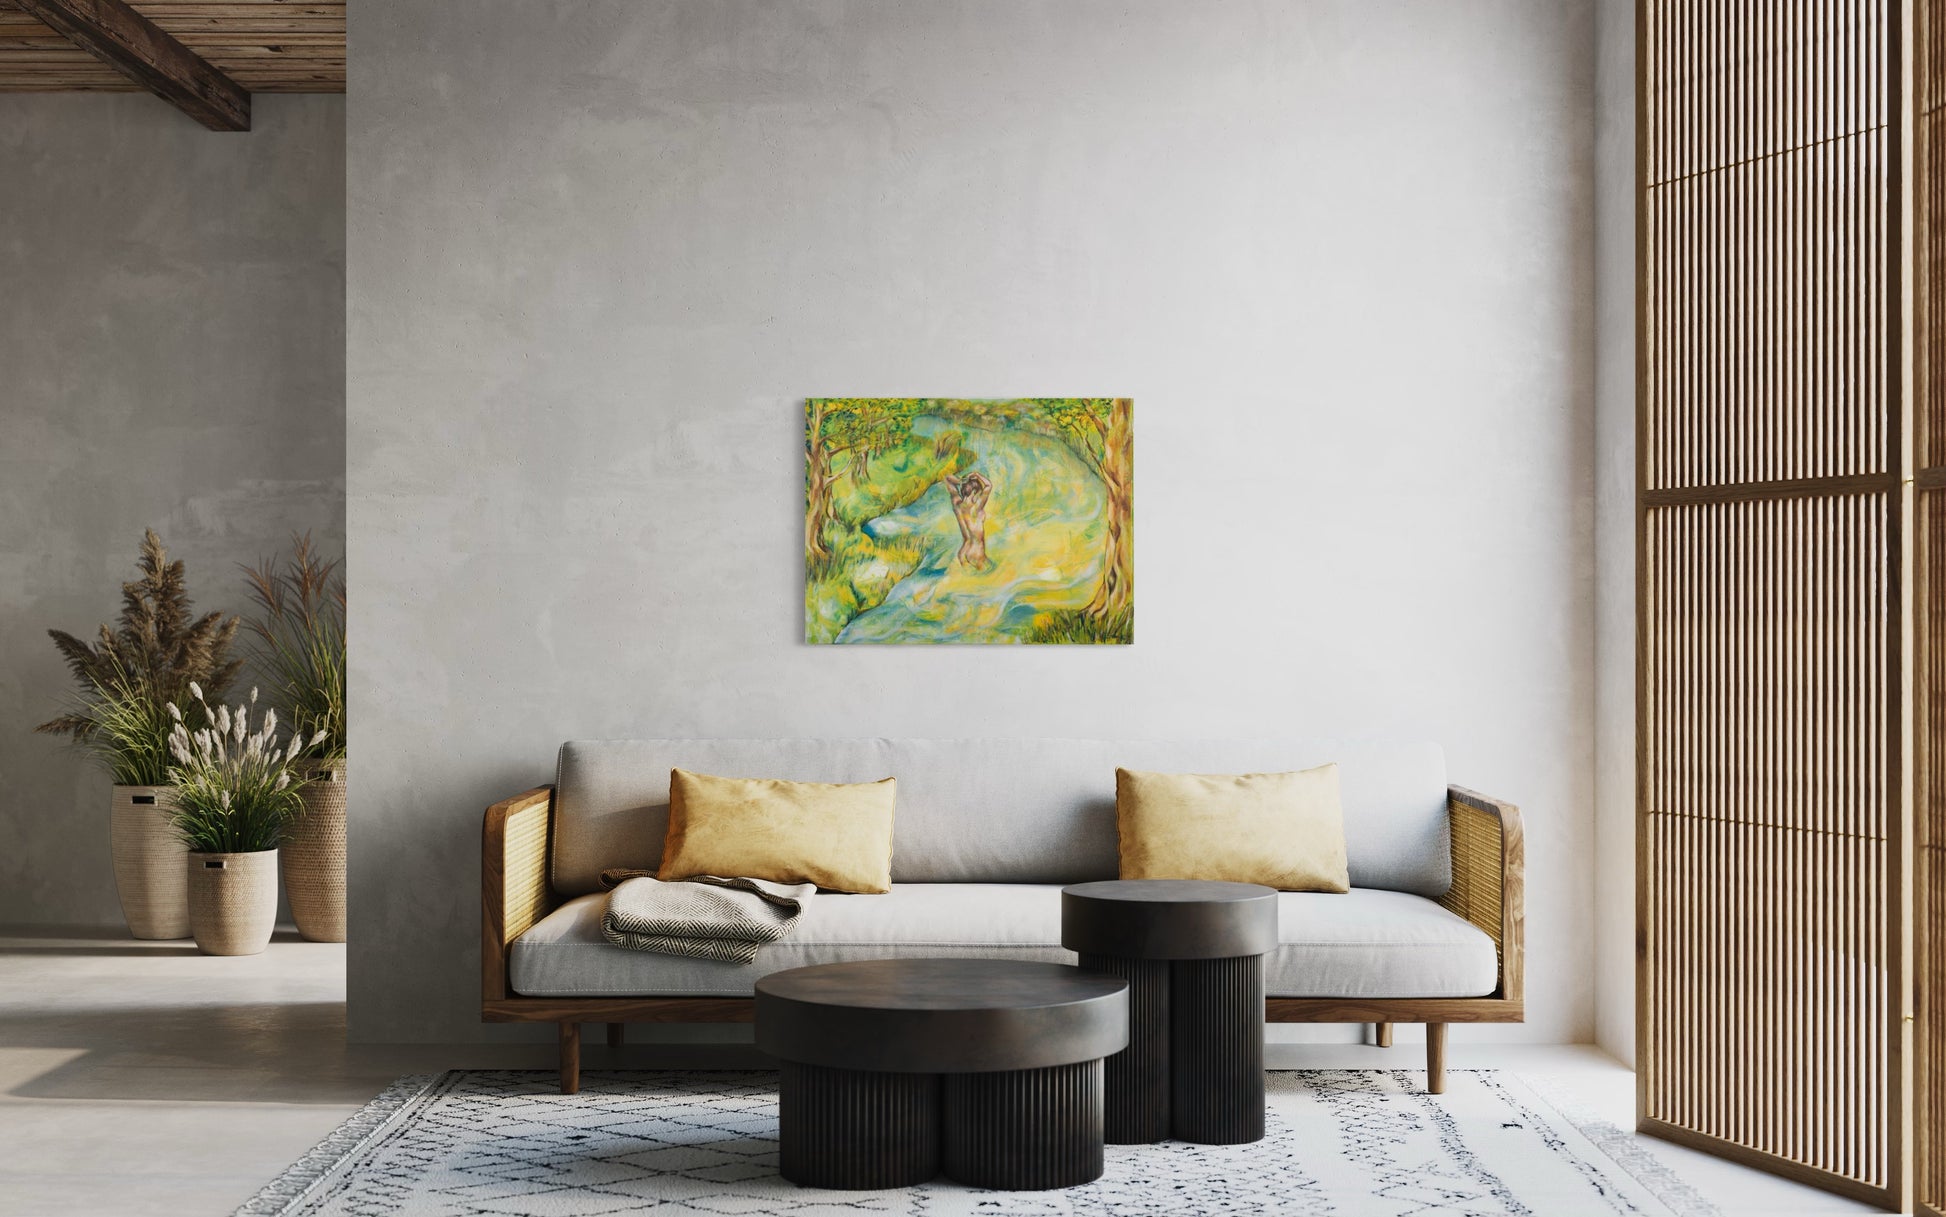 Bath, Oil painting on canva, for a natural, sensual and fresh feeling in your space, Emmanuelle Erard Art